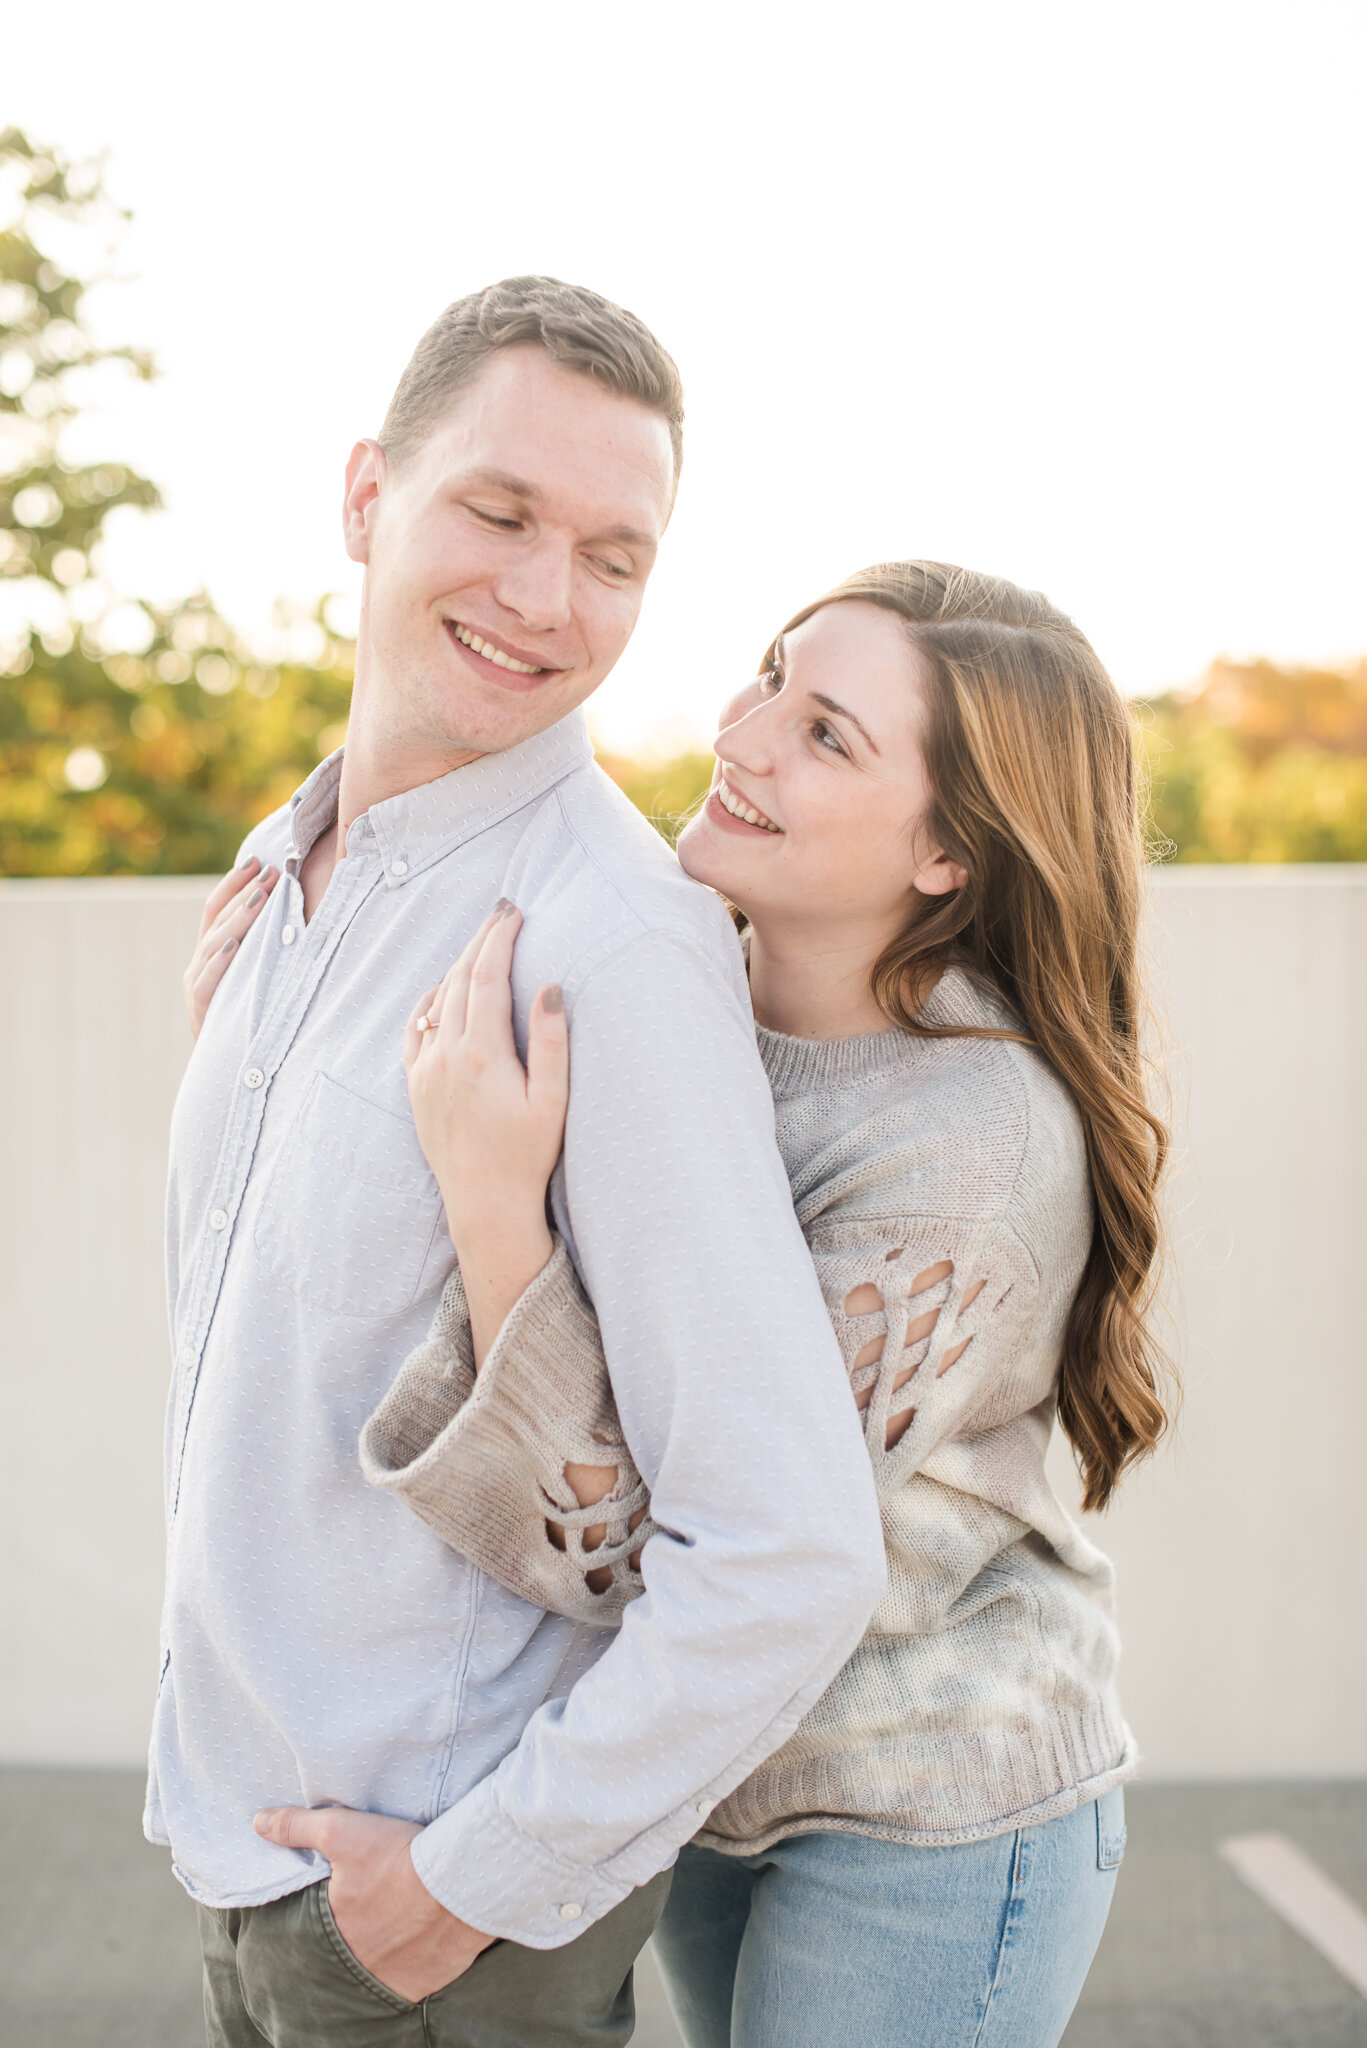 October Engagement Session at Holcomb Gardens7896.jpg